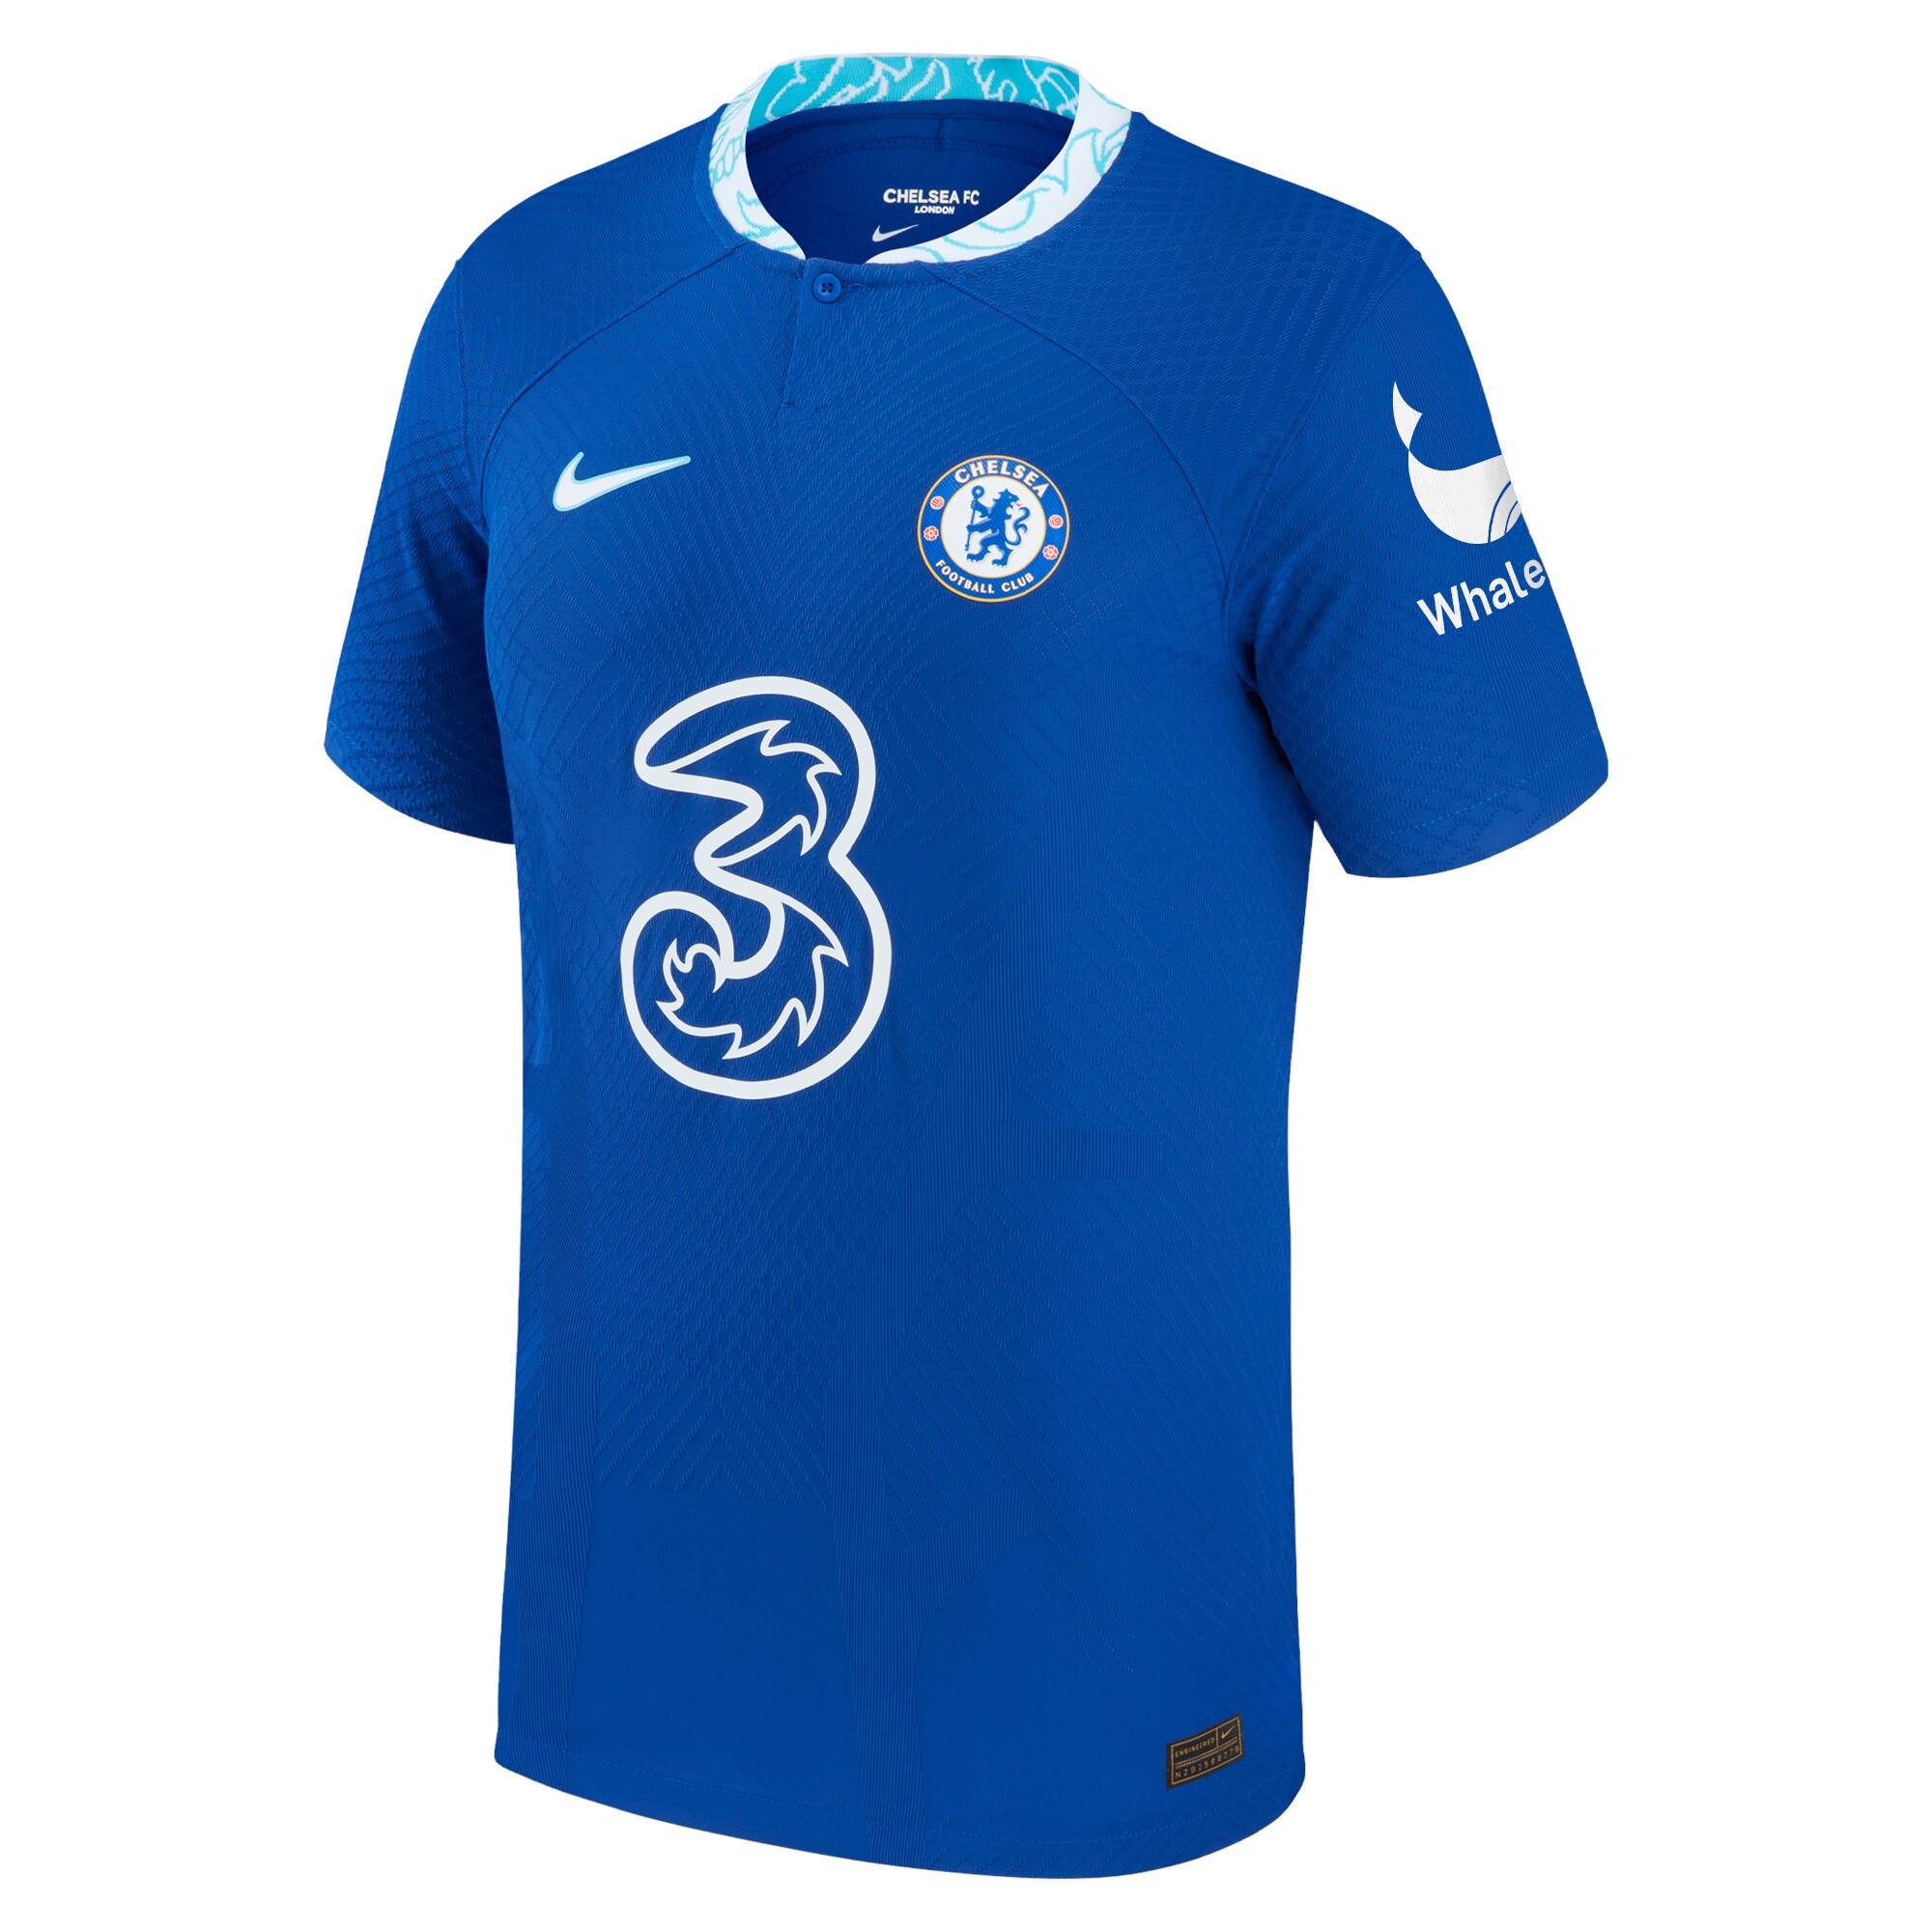 Chelsea Cup Home Vapor Match Shirt 2022-23 with Marcos A. 3 printing